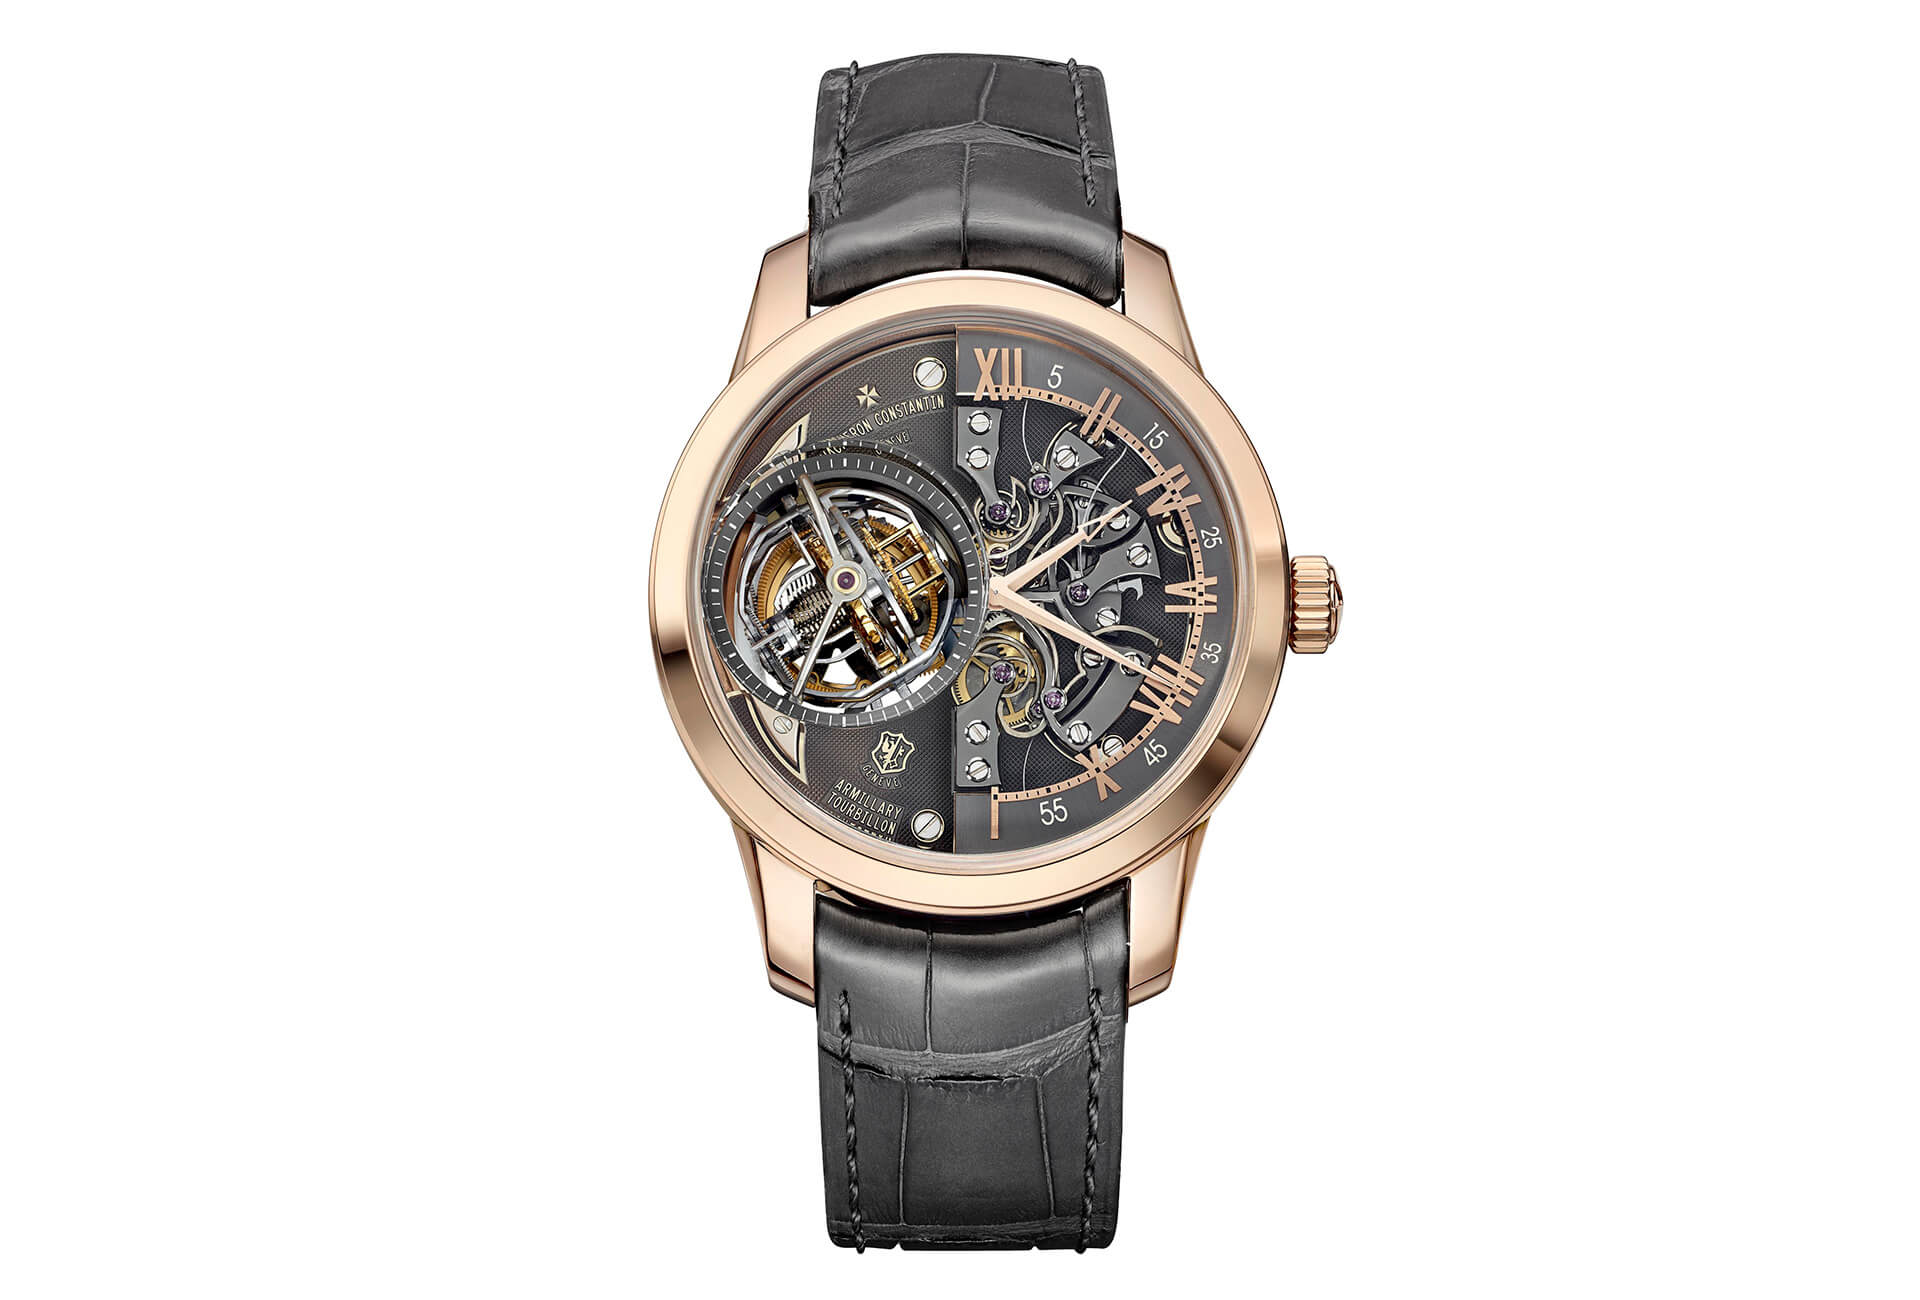 Vacheron Constantin Les Cabinotiers watches touring America – FHH Journal